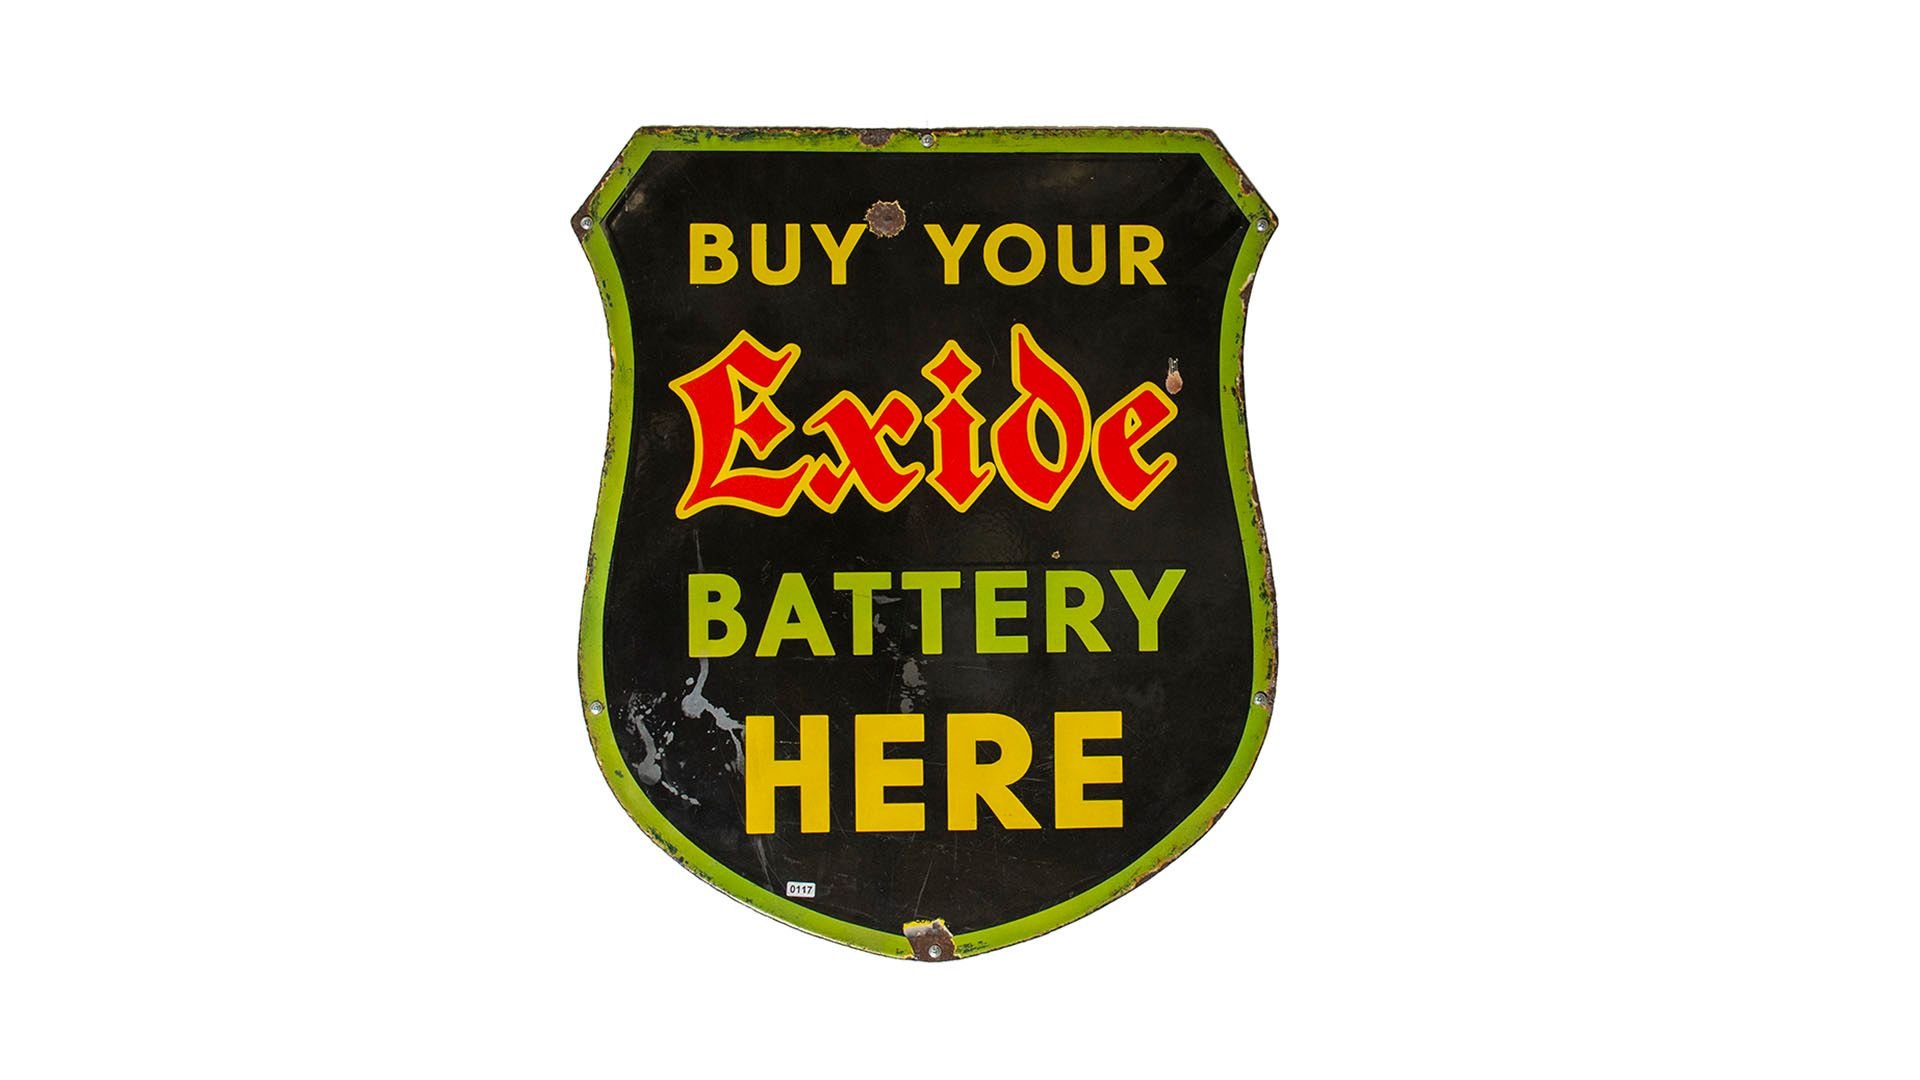 Broad Arrow Auctions | Buy your Exide Battery Here Enamel Sign